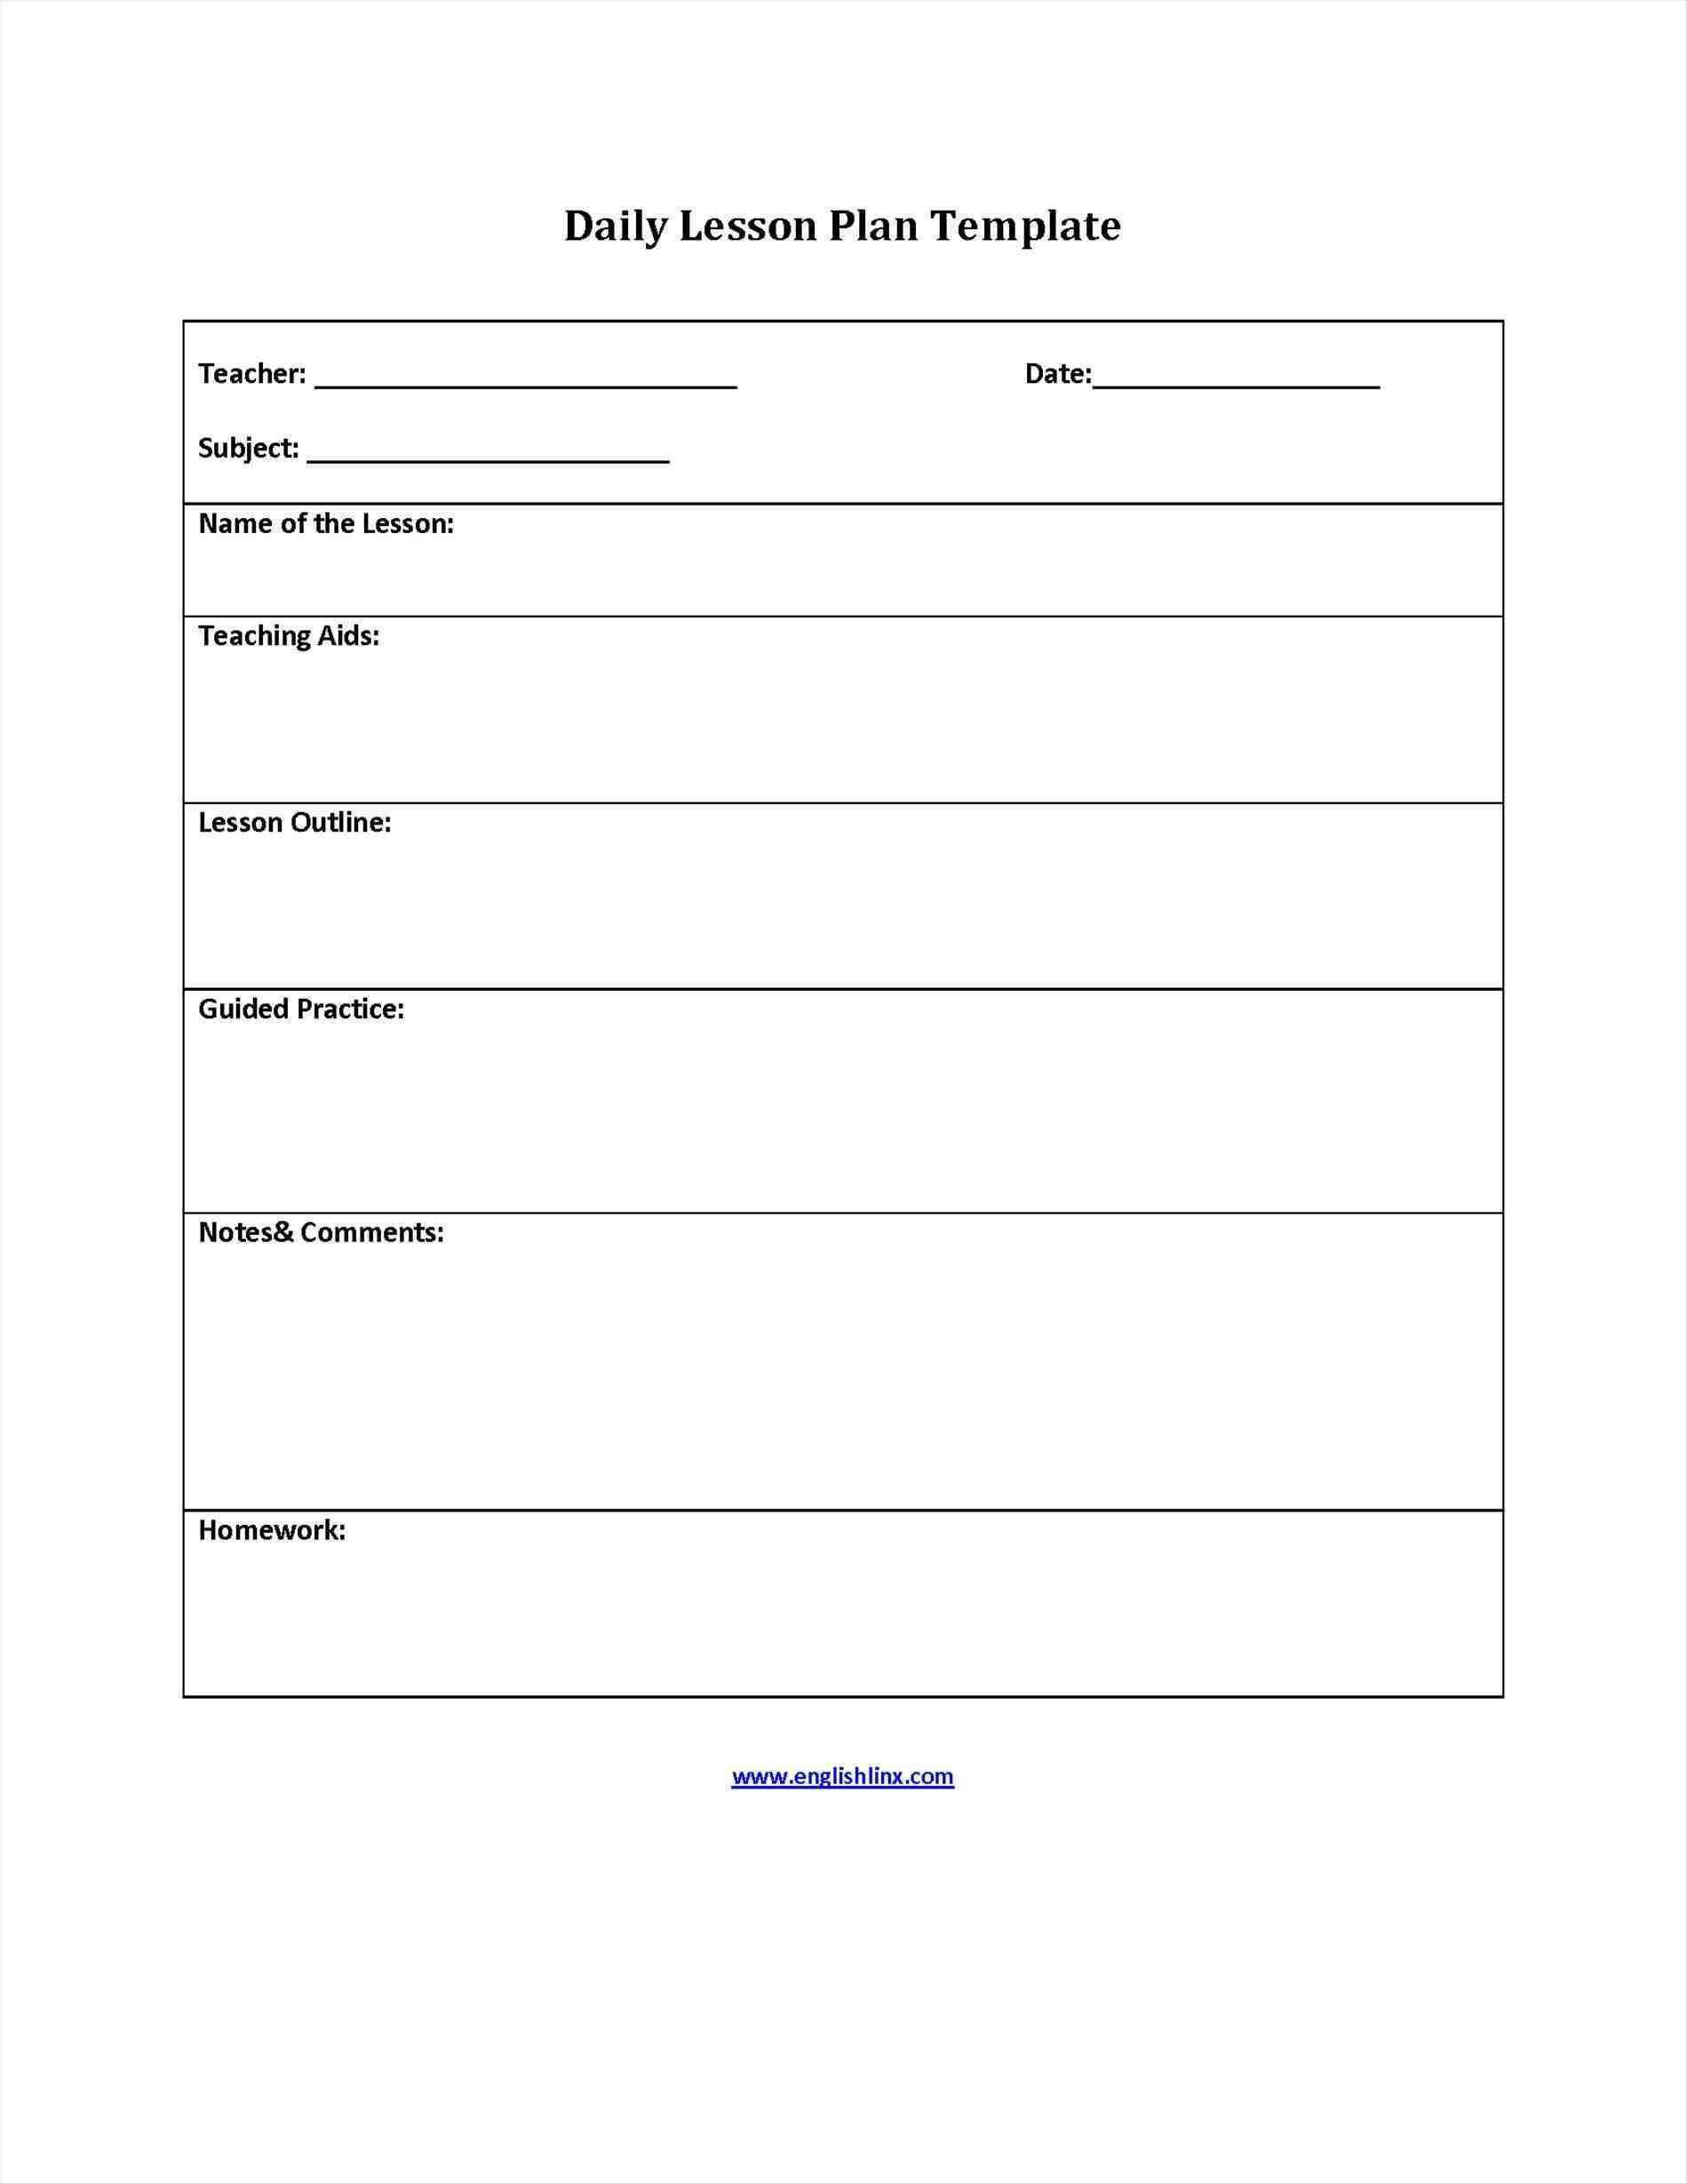 Lesson Plan Example for Elementary Elementary Lesson Plan Template Addictionary